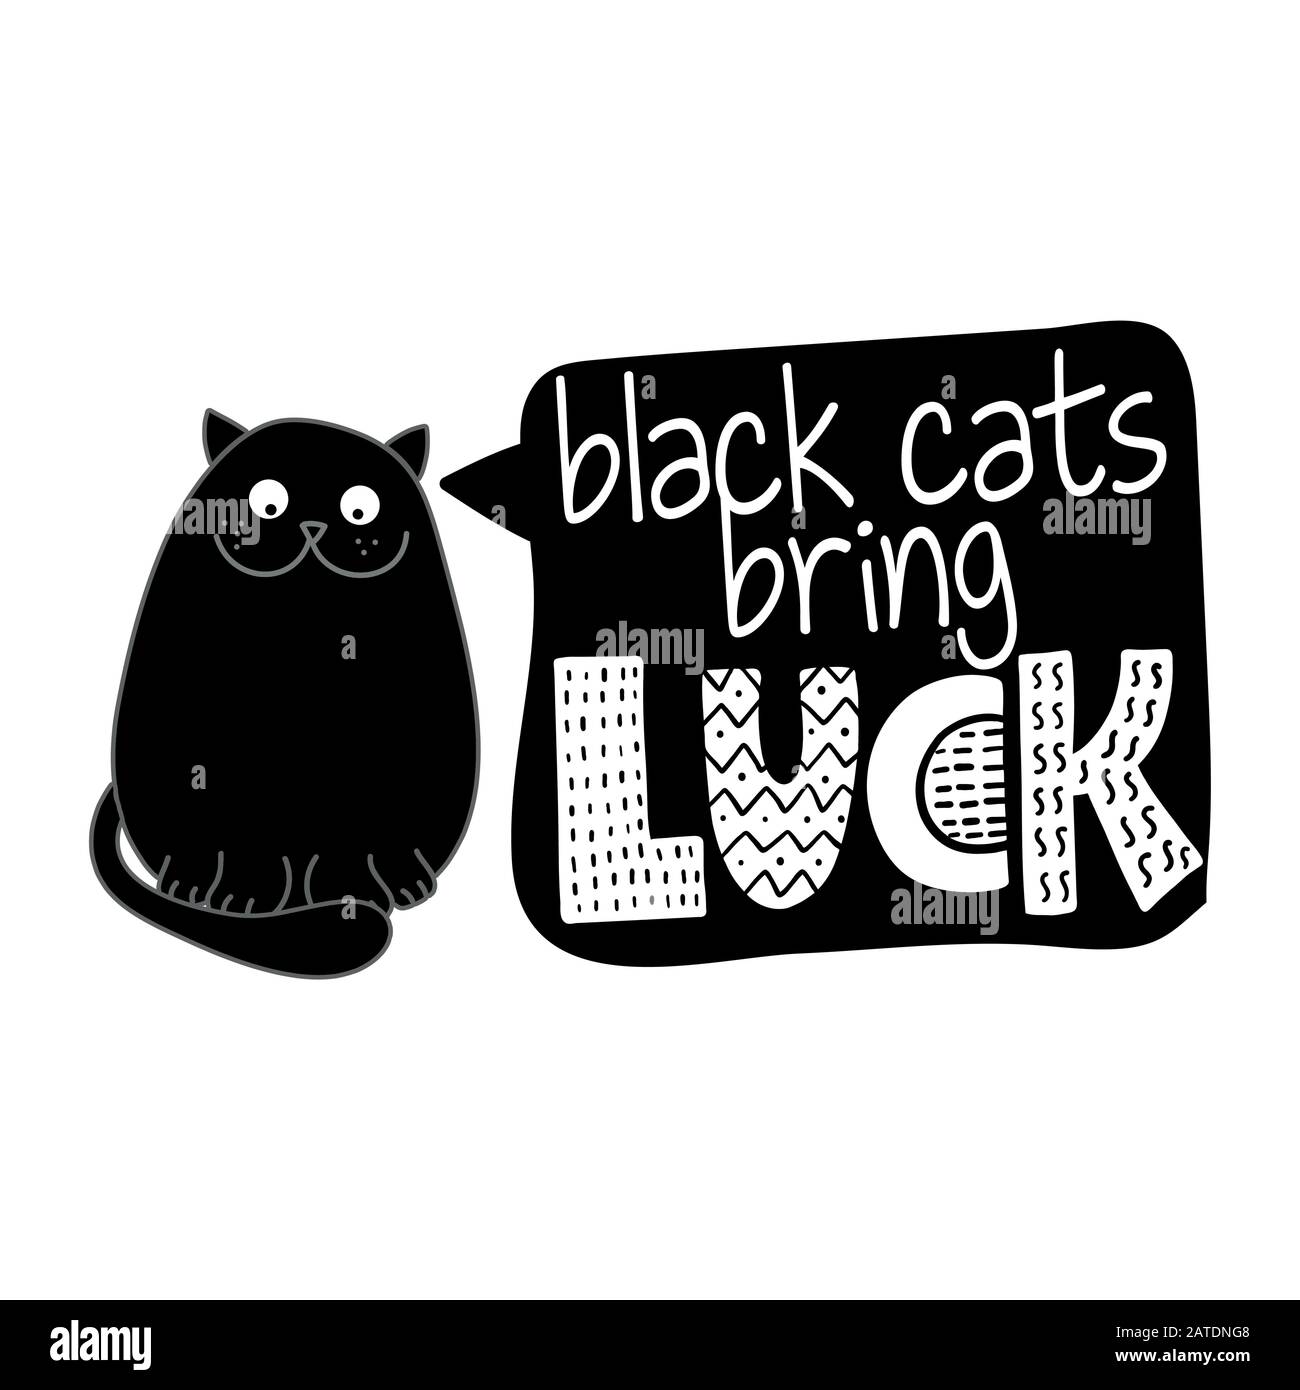 Black cats bring luck - funny quote design with grumpy black cat. Kitten calligraphy sign for print. Cute cat poster with lettering, good for t shirts Stock Vector